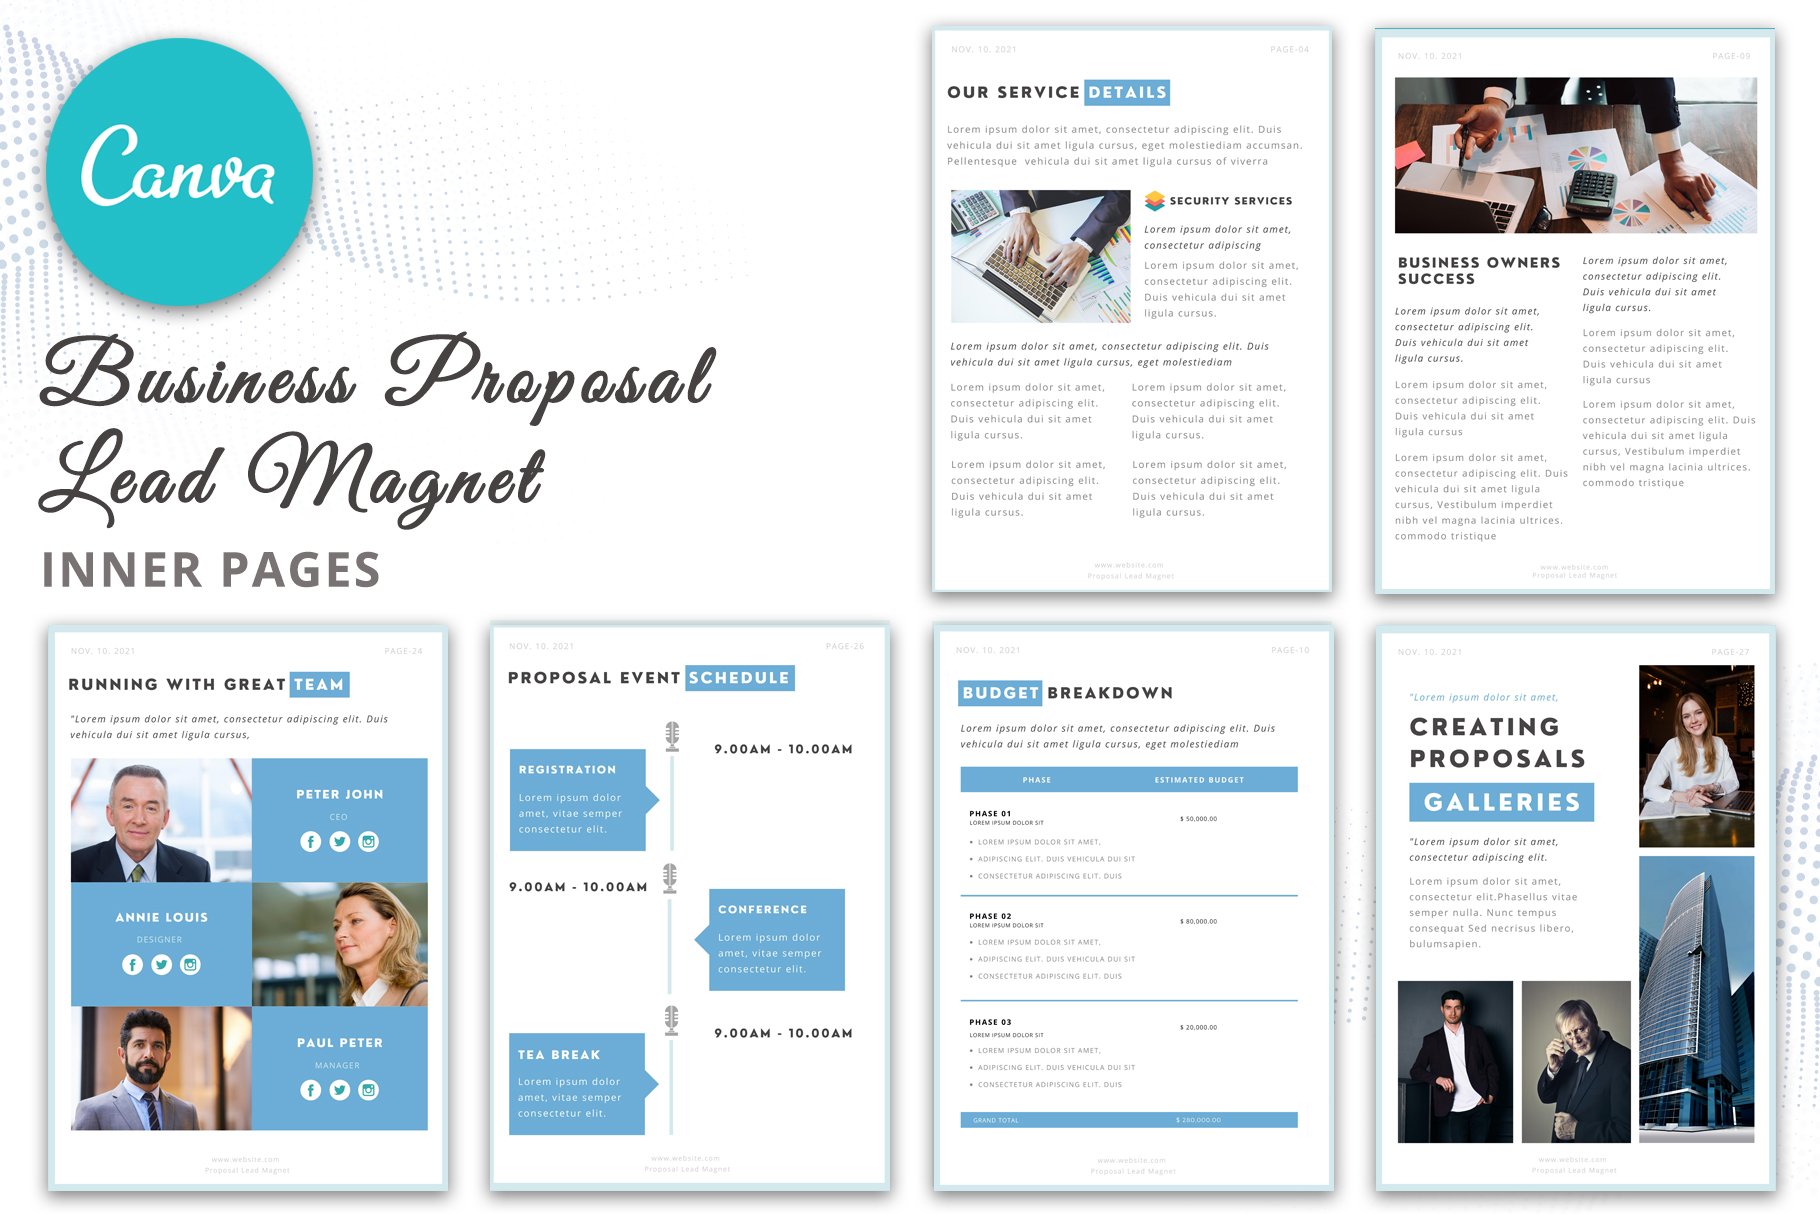 Business Proposal Lead Magnet preview image.